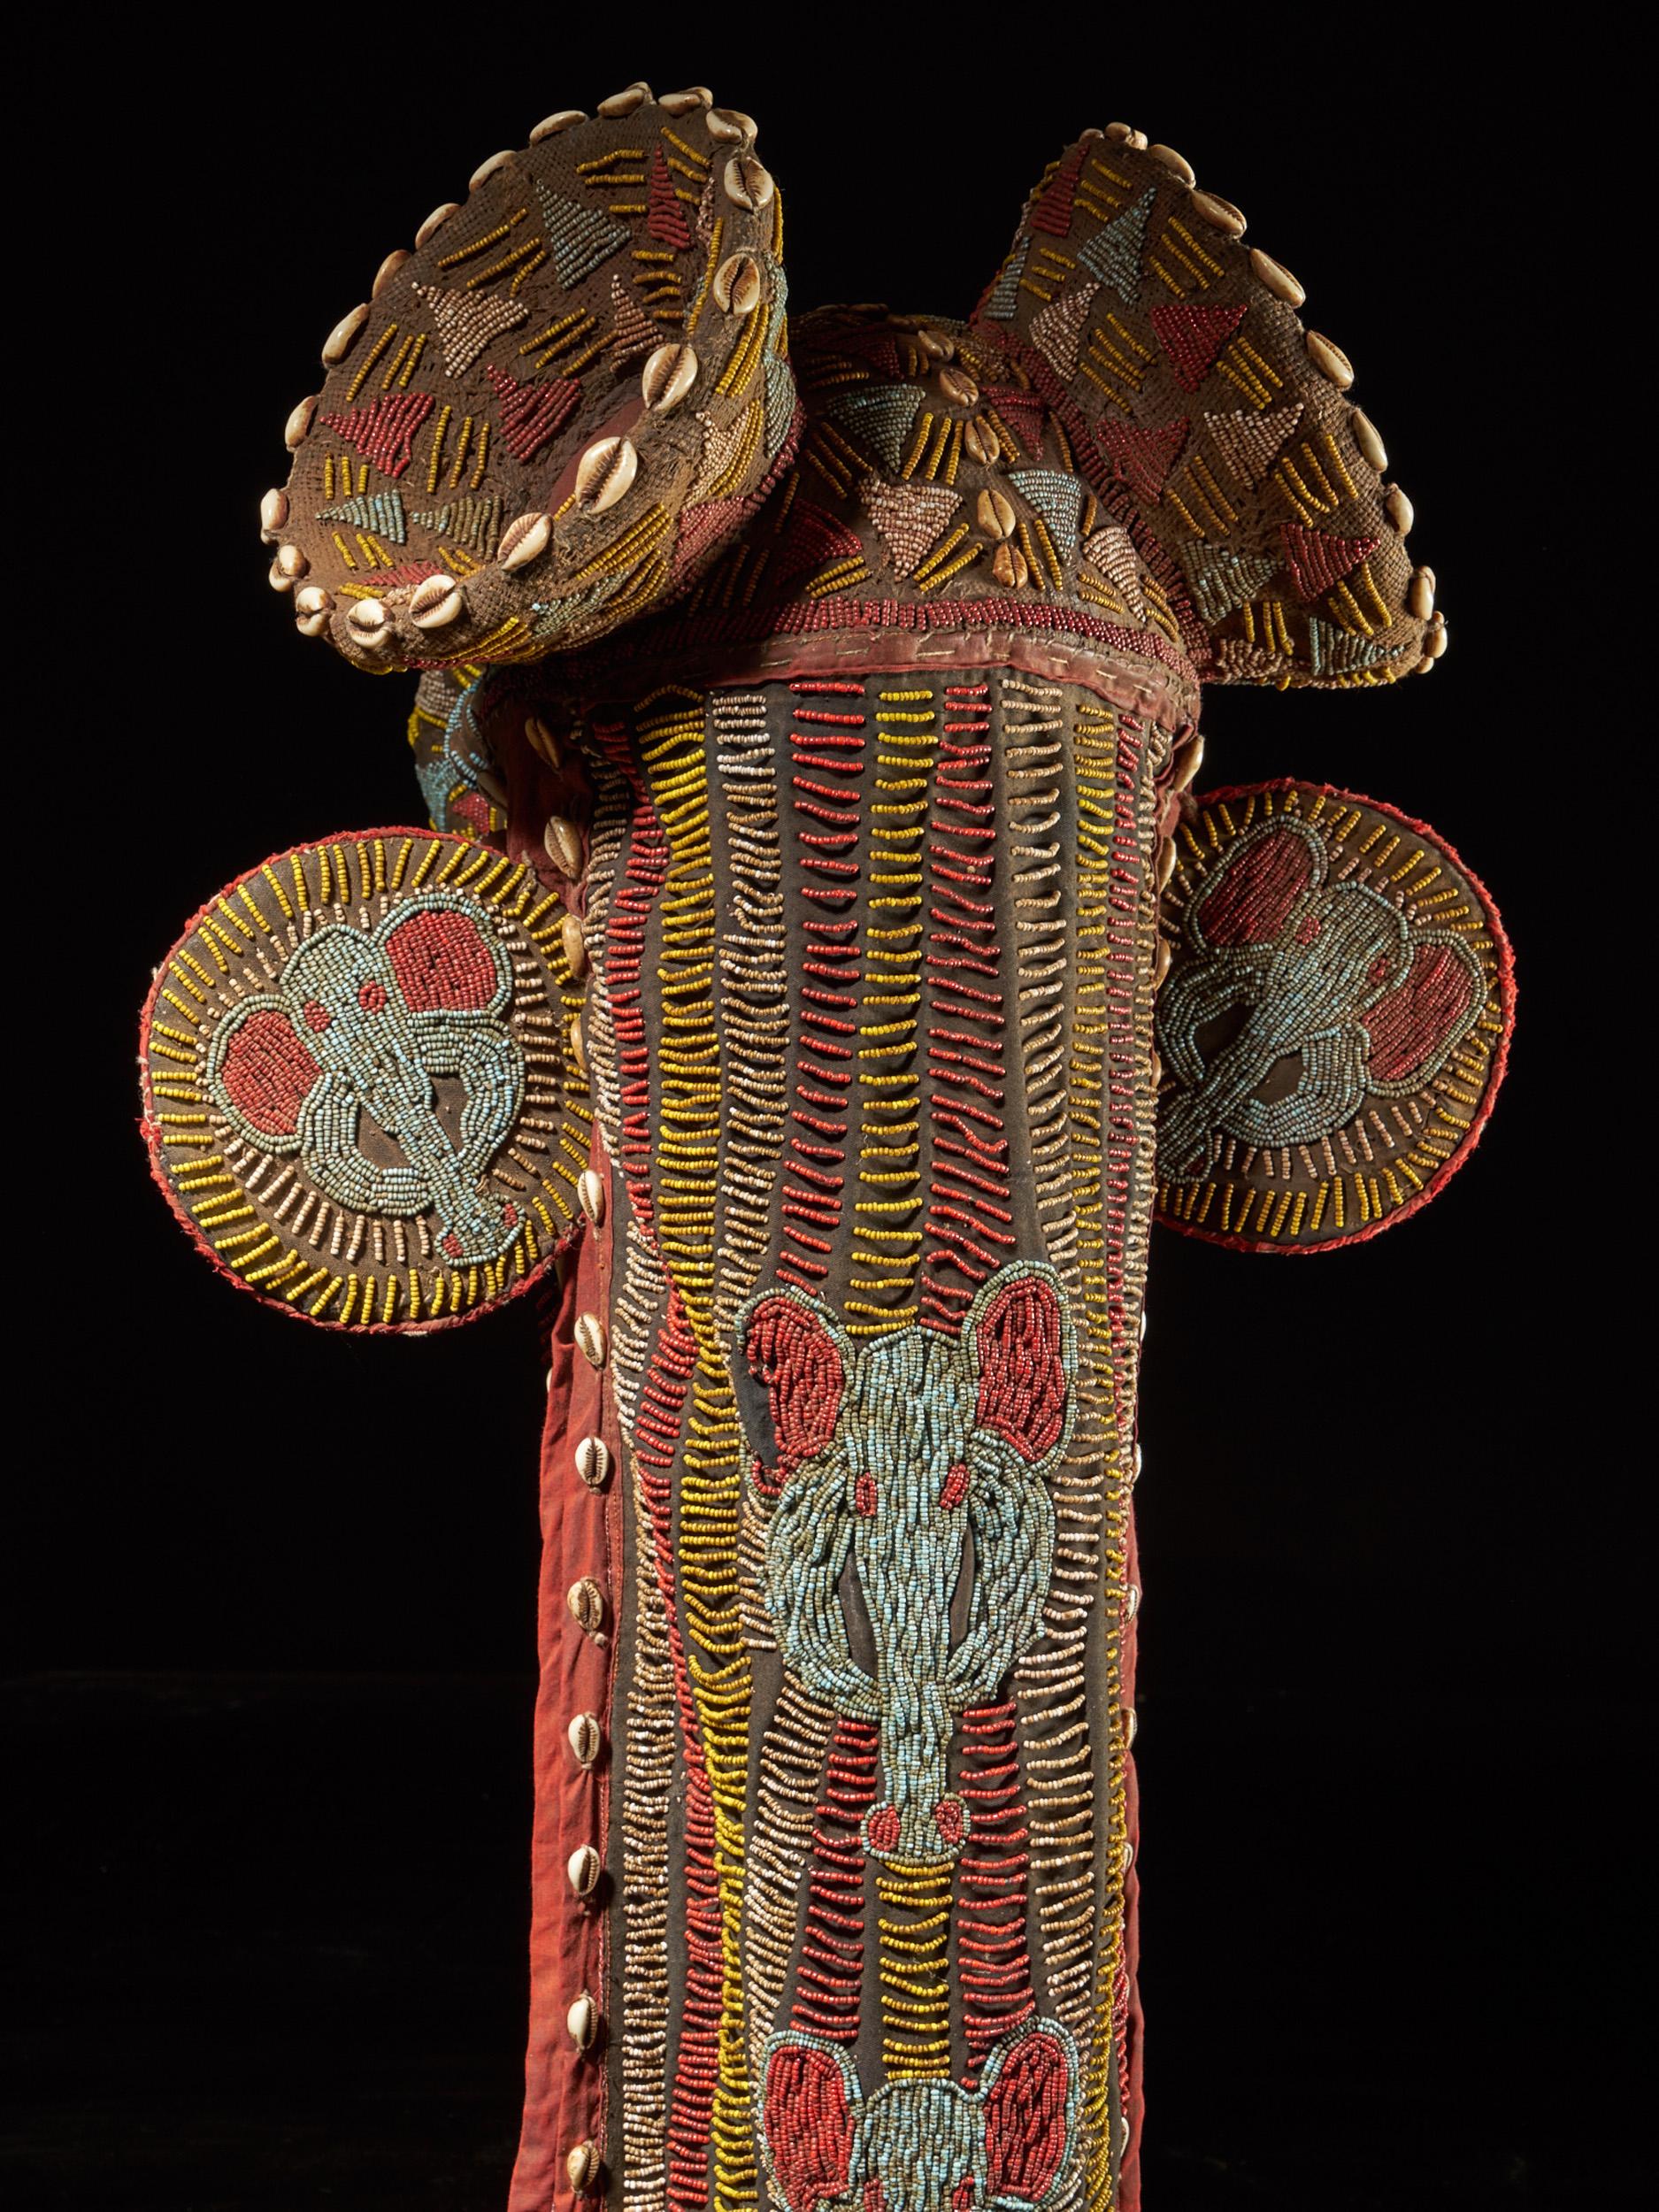 Hand-Crafted Beaded Elephant Mask, Grassland People, Cameroon